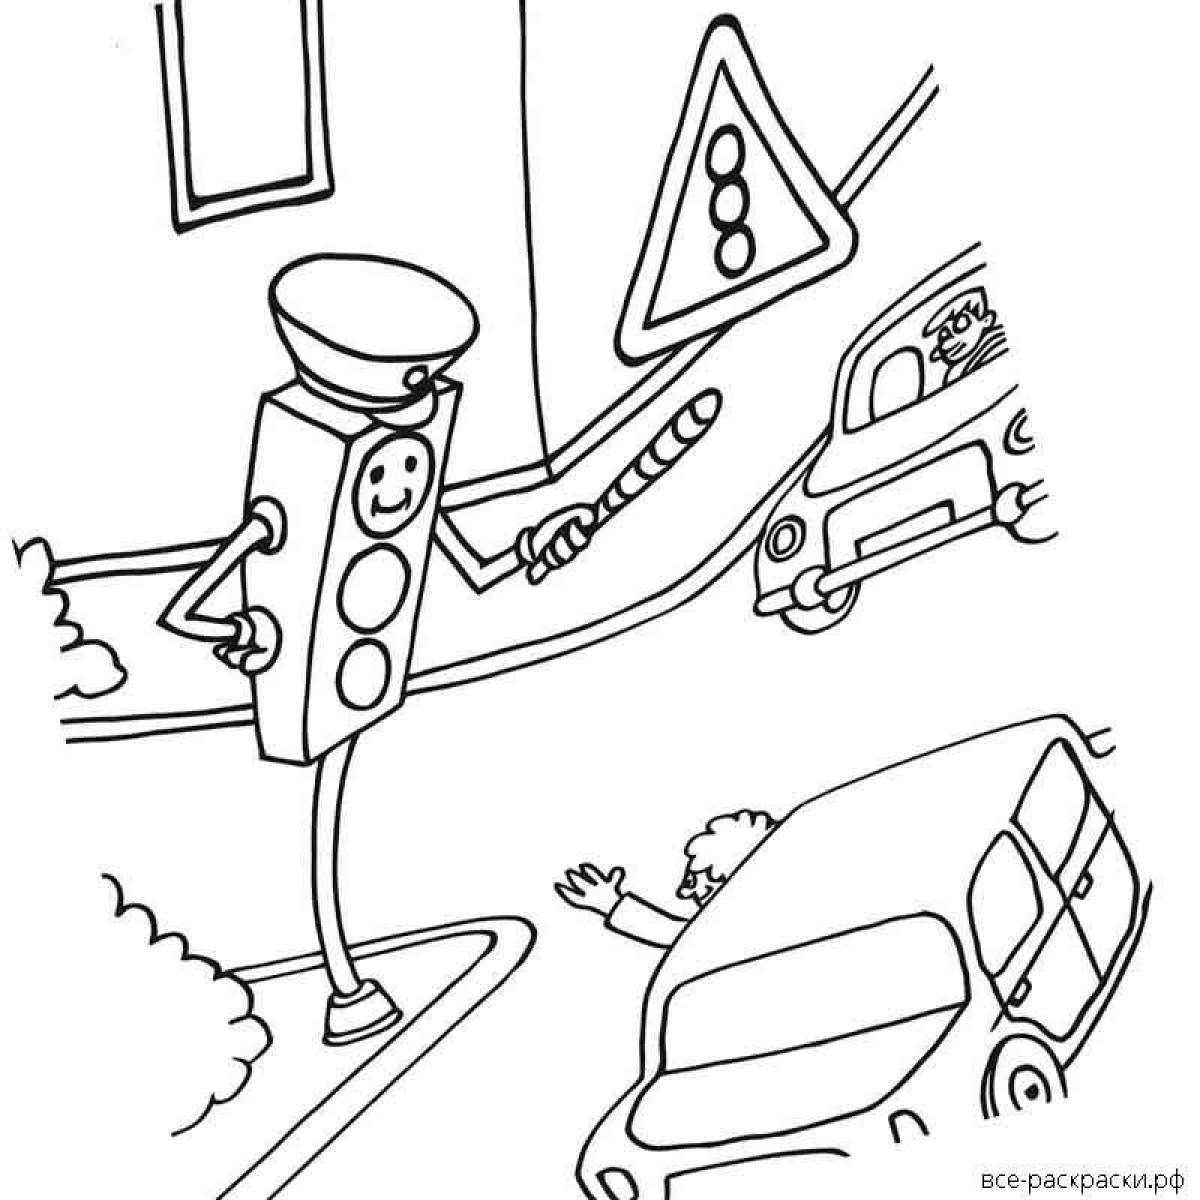 Colorful traffic light coloring page for 6-7 year olds